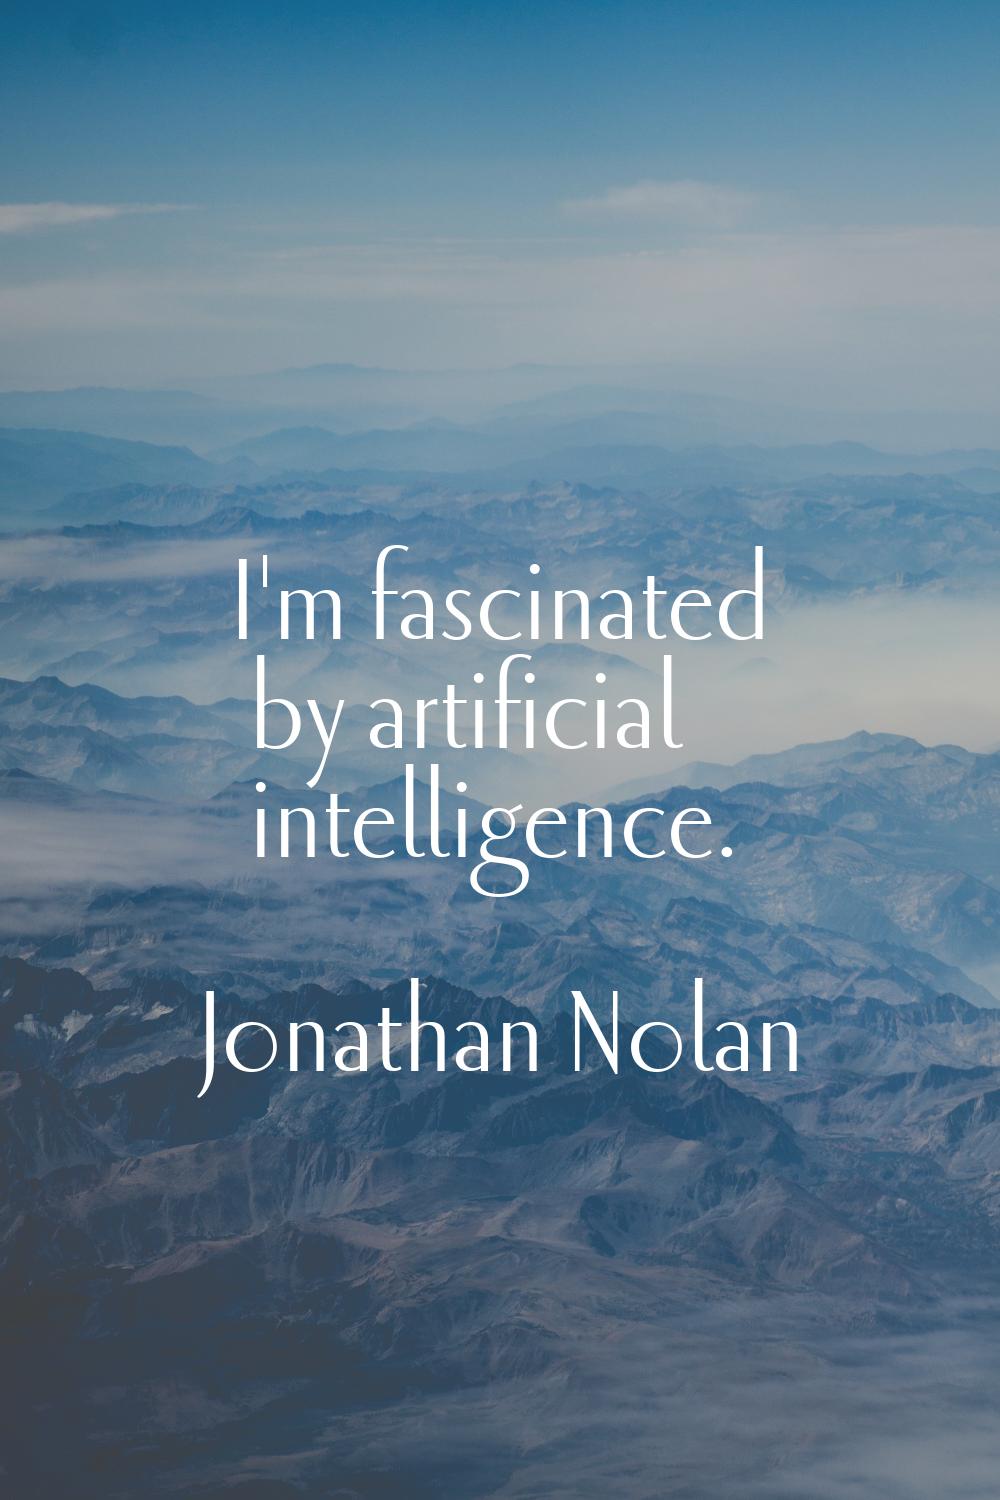 I'm fascinated by artificial intelligence.